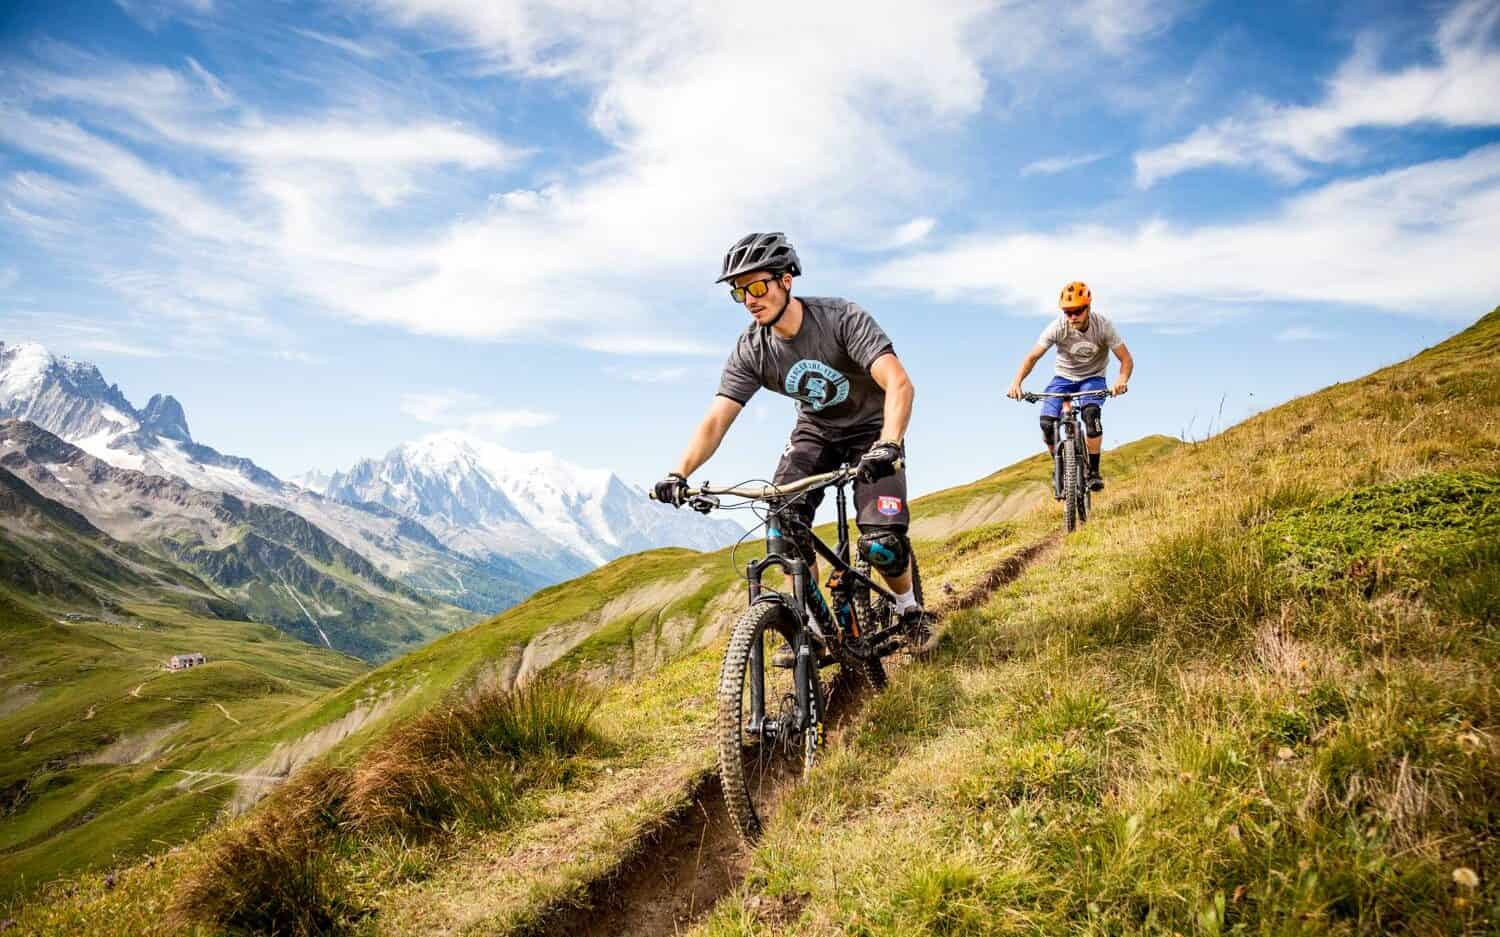 Two mountain bikers follow a grassy track in autumn